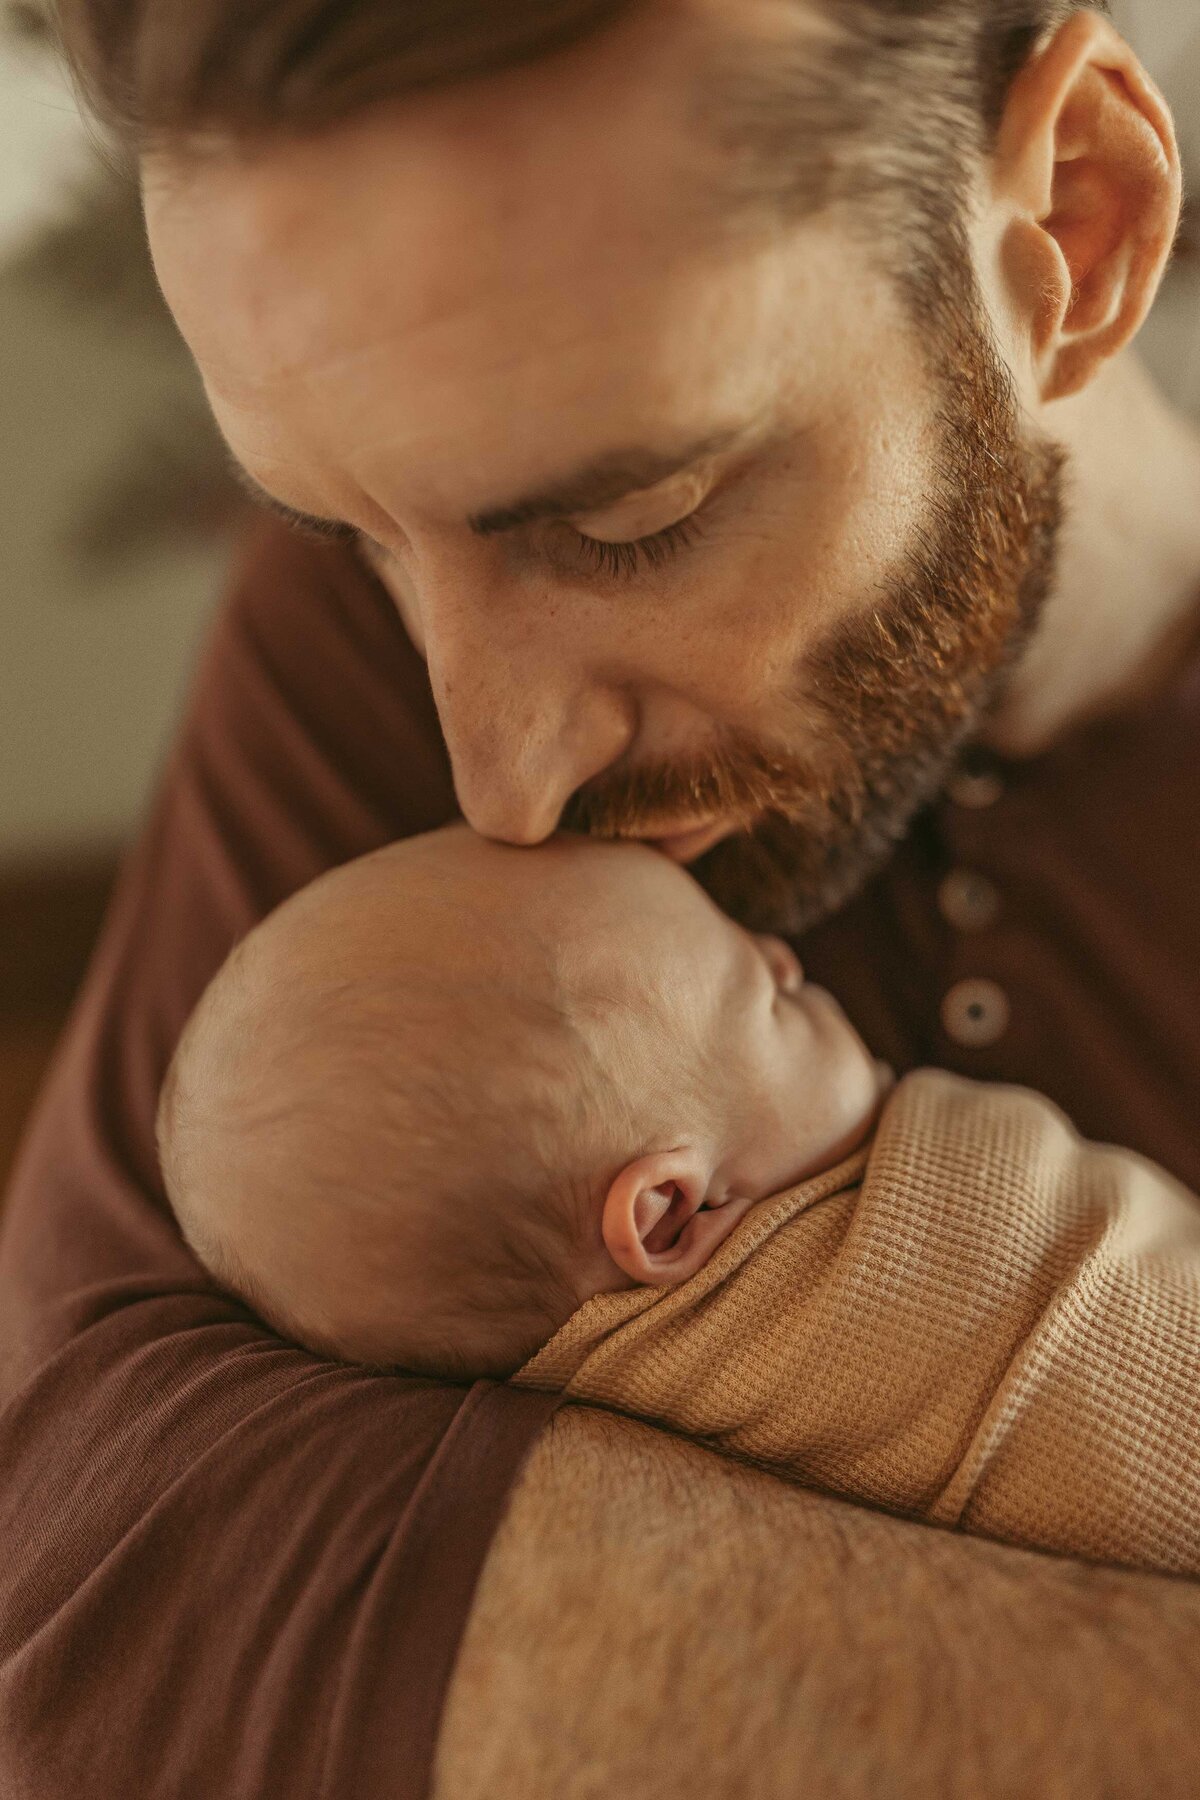 Man with beard kissing baby on he forehead softly.